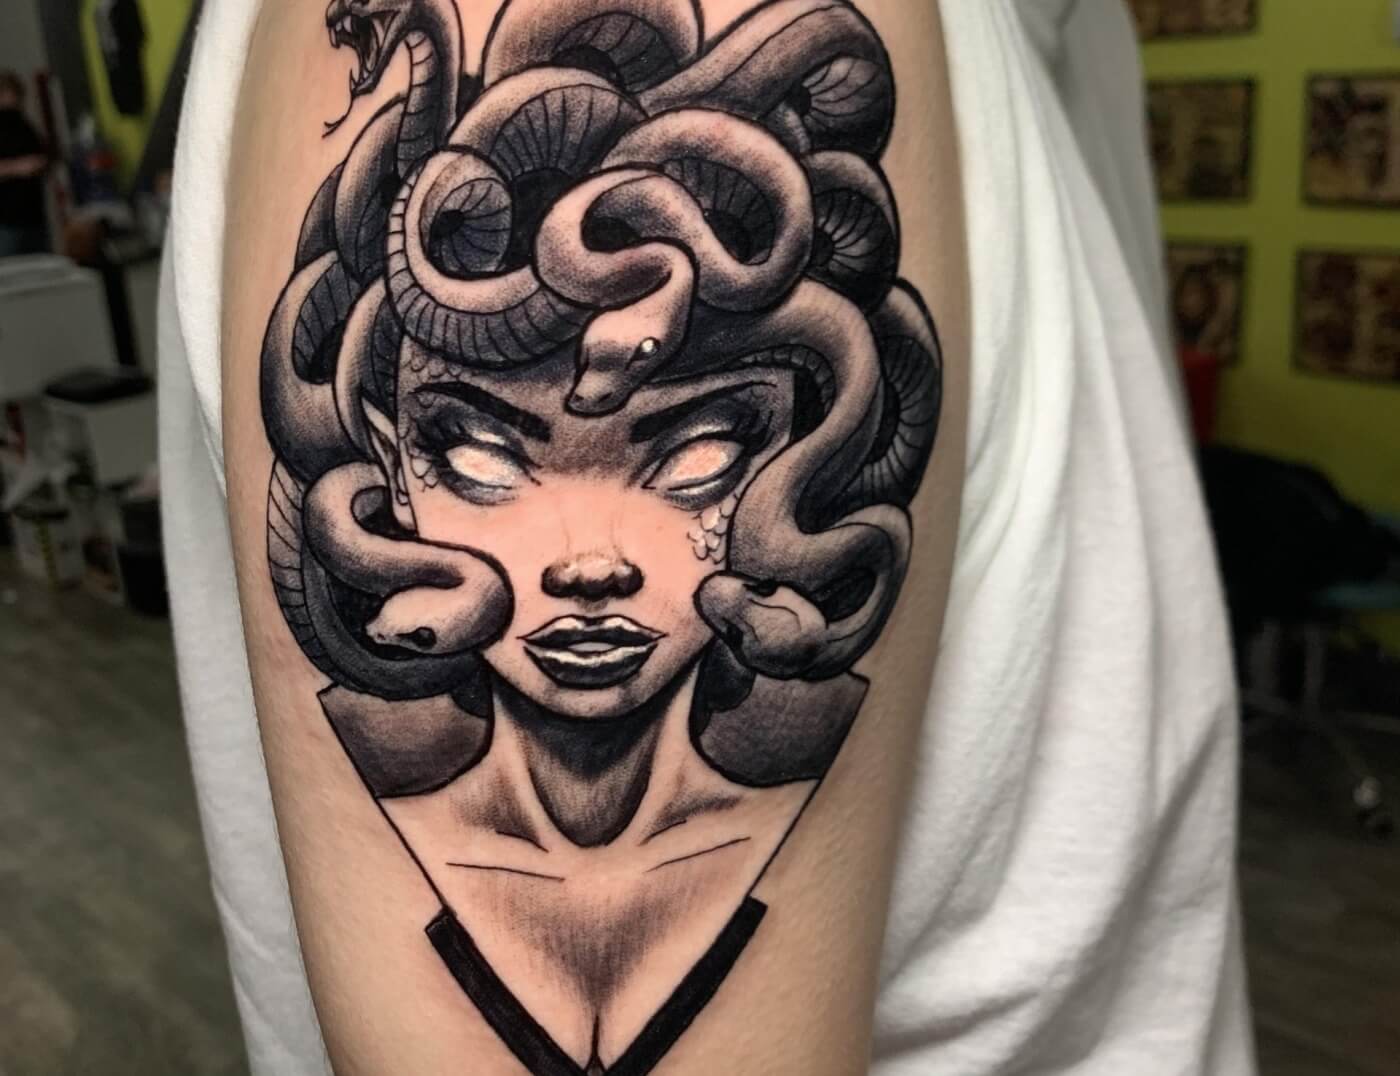 Medusa Black & Grey Anime Portrait Tattoo Created By J.R. Outlaw Of Iron Palm Tattoos & Body Piercing in Atlanta. We're open late night and walk ins are always welcome. Call 404-973-7828 or stop by for a free consultation.